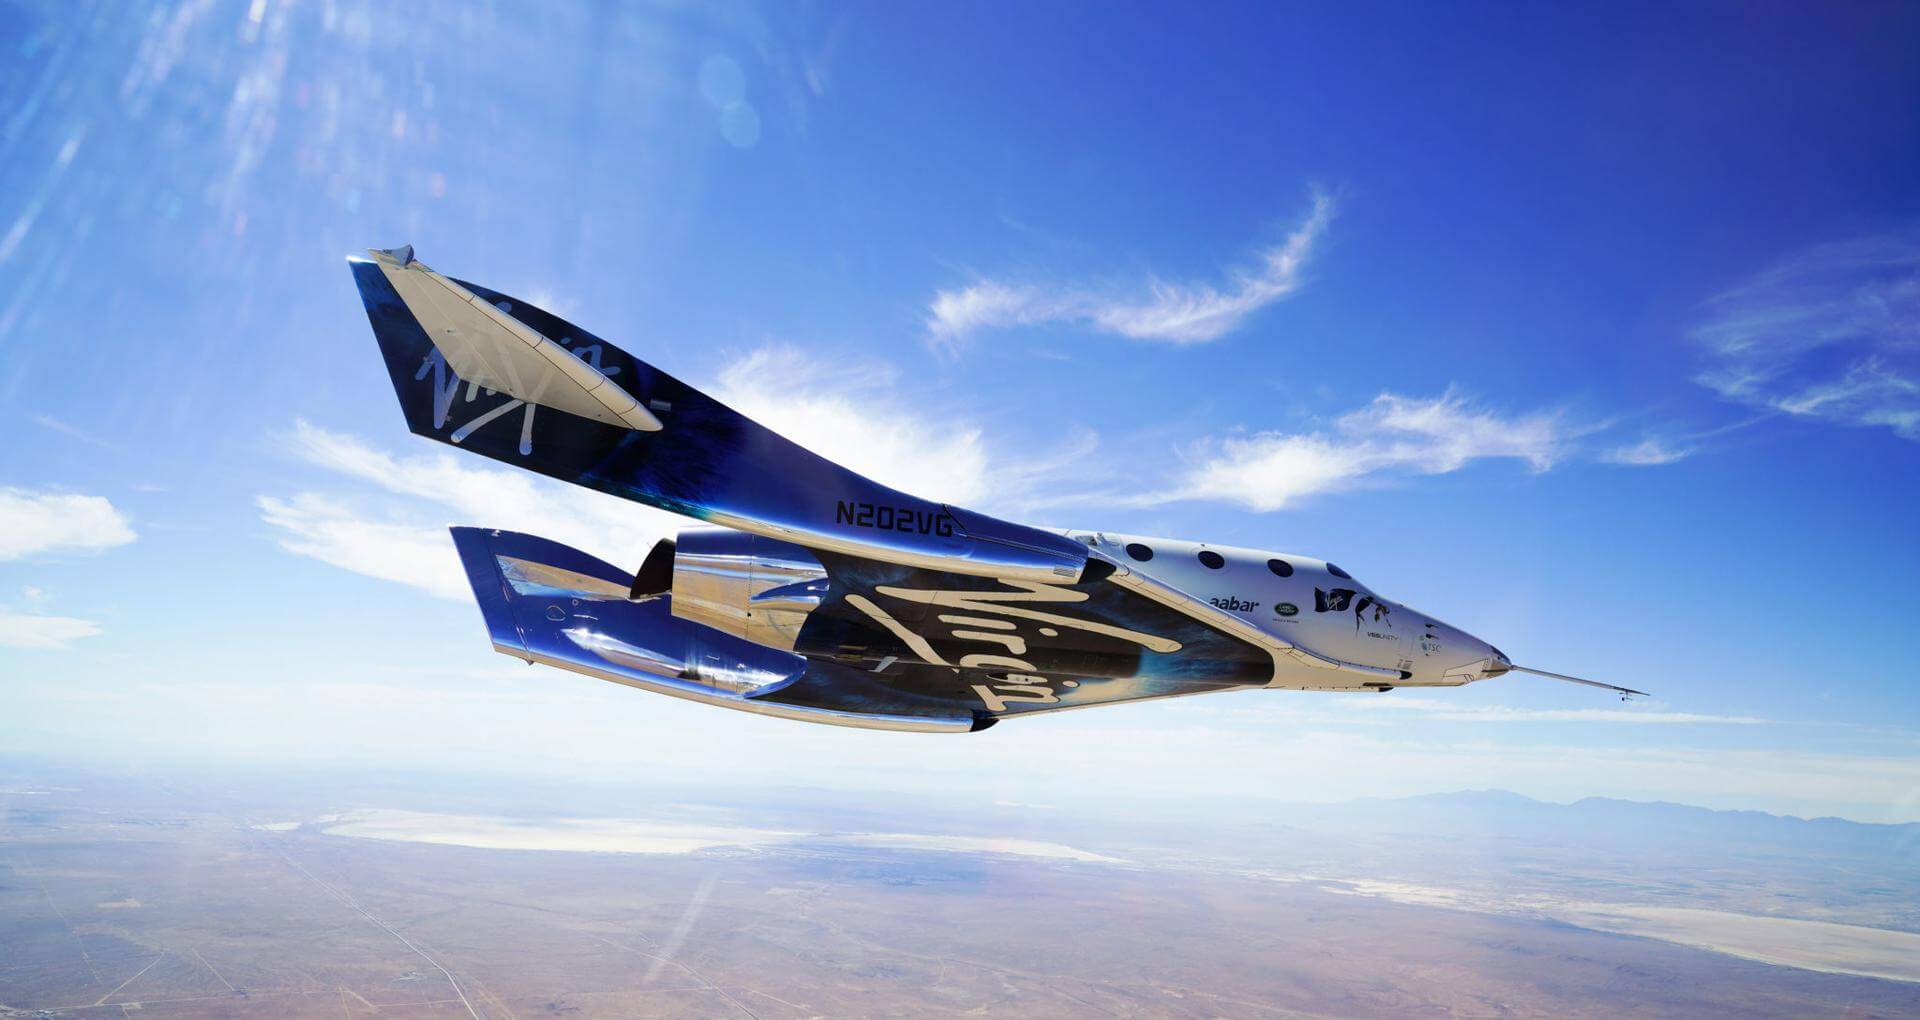 Image of SpaceShipTwo